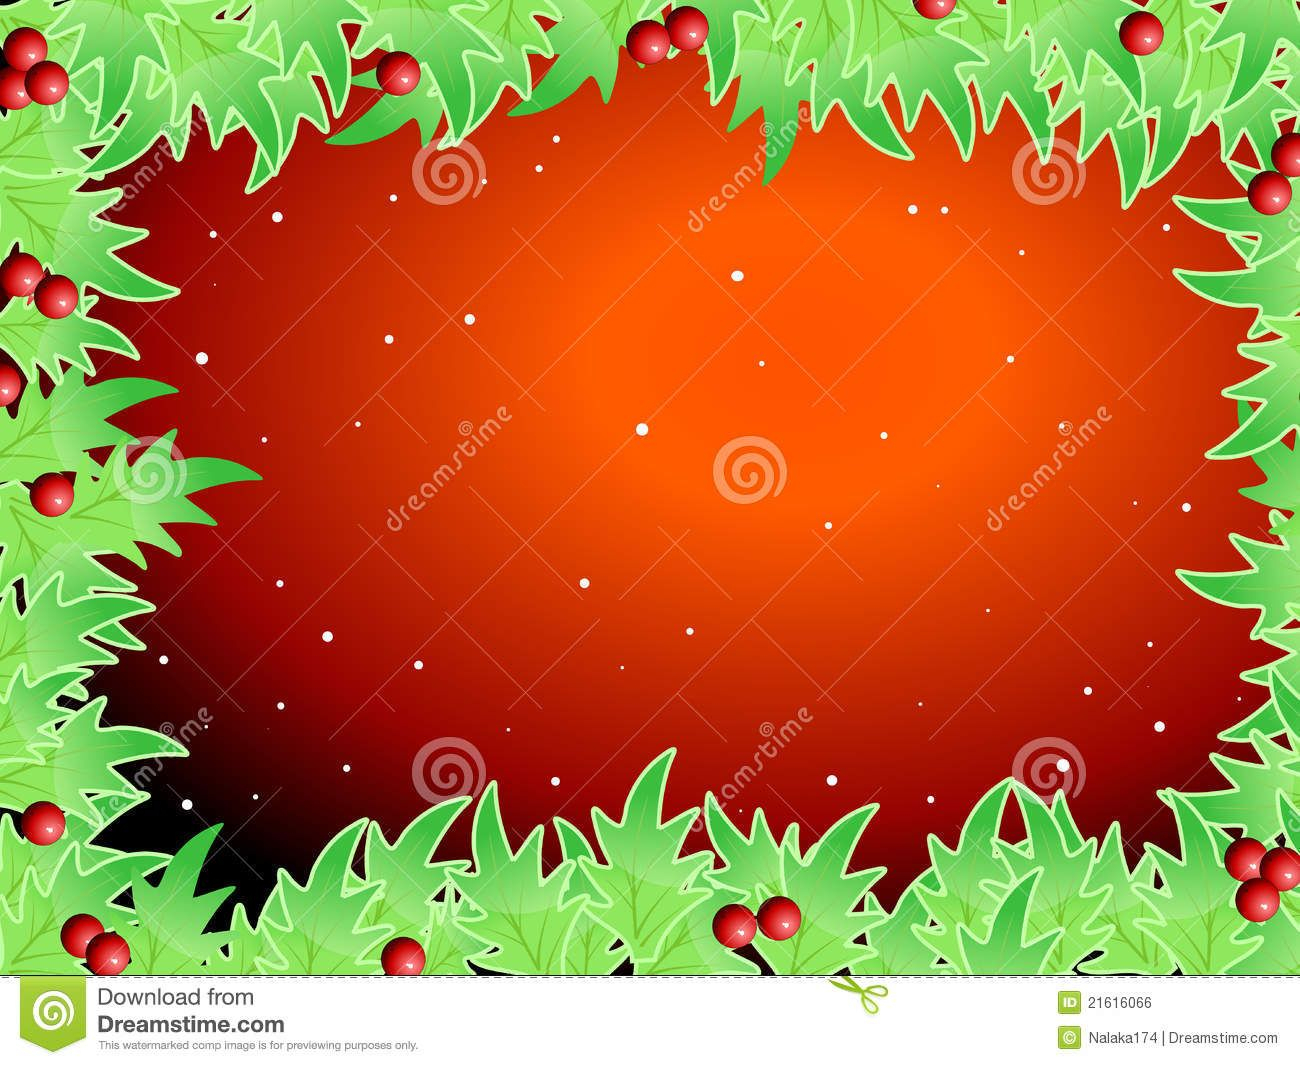 Blank Template For Christmas Greetings Card Royalty Free For Blank Christmas Card Templates Free